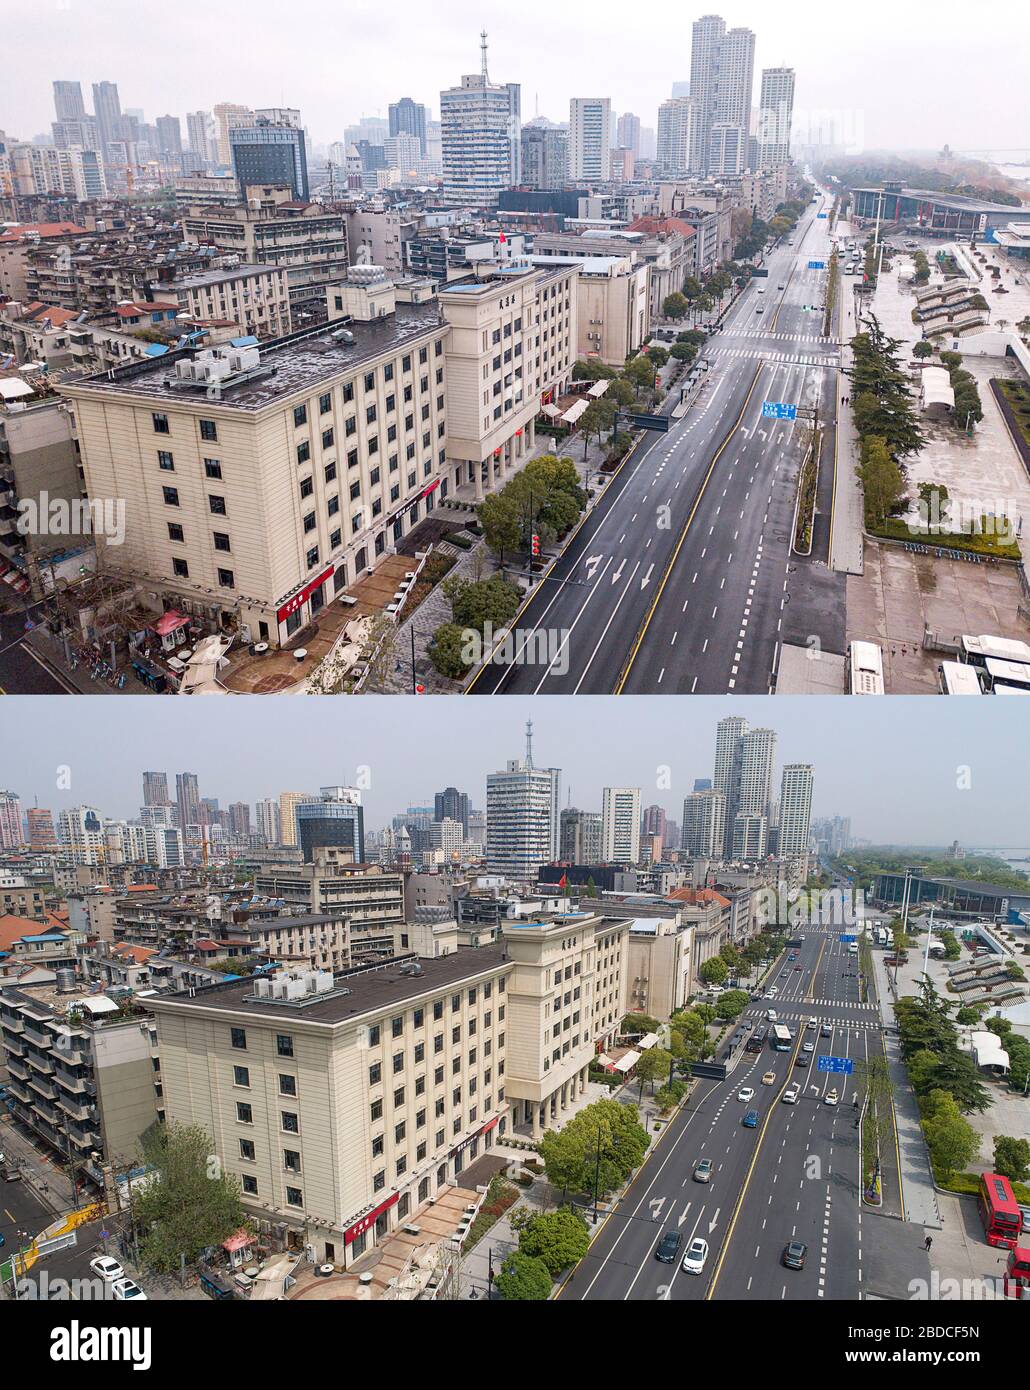 (200408) -- WUHAN, April 8, 2020 (Xinhua) -- Combo aerial photo shows the Yanjiang Avenue in Hankou District of Wuhan, central China's Hubei Province on Jan. 26, 2020 (upper) and on April 8, 2020.  With long lines of cars streaming through expressway tollgates and masked passengers boarding trains, the megacity of Wuhan in central China lifted outbound travel restrictions on Wednesday after almost 11 weeks of lockdown imposed to stem the COVID-19 outbreak (Xinhua/Xiong Qi) Stock Photo